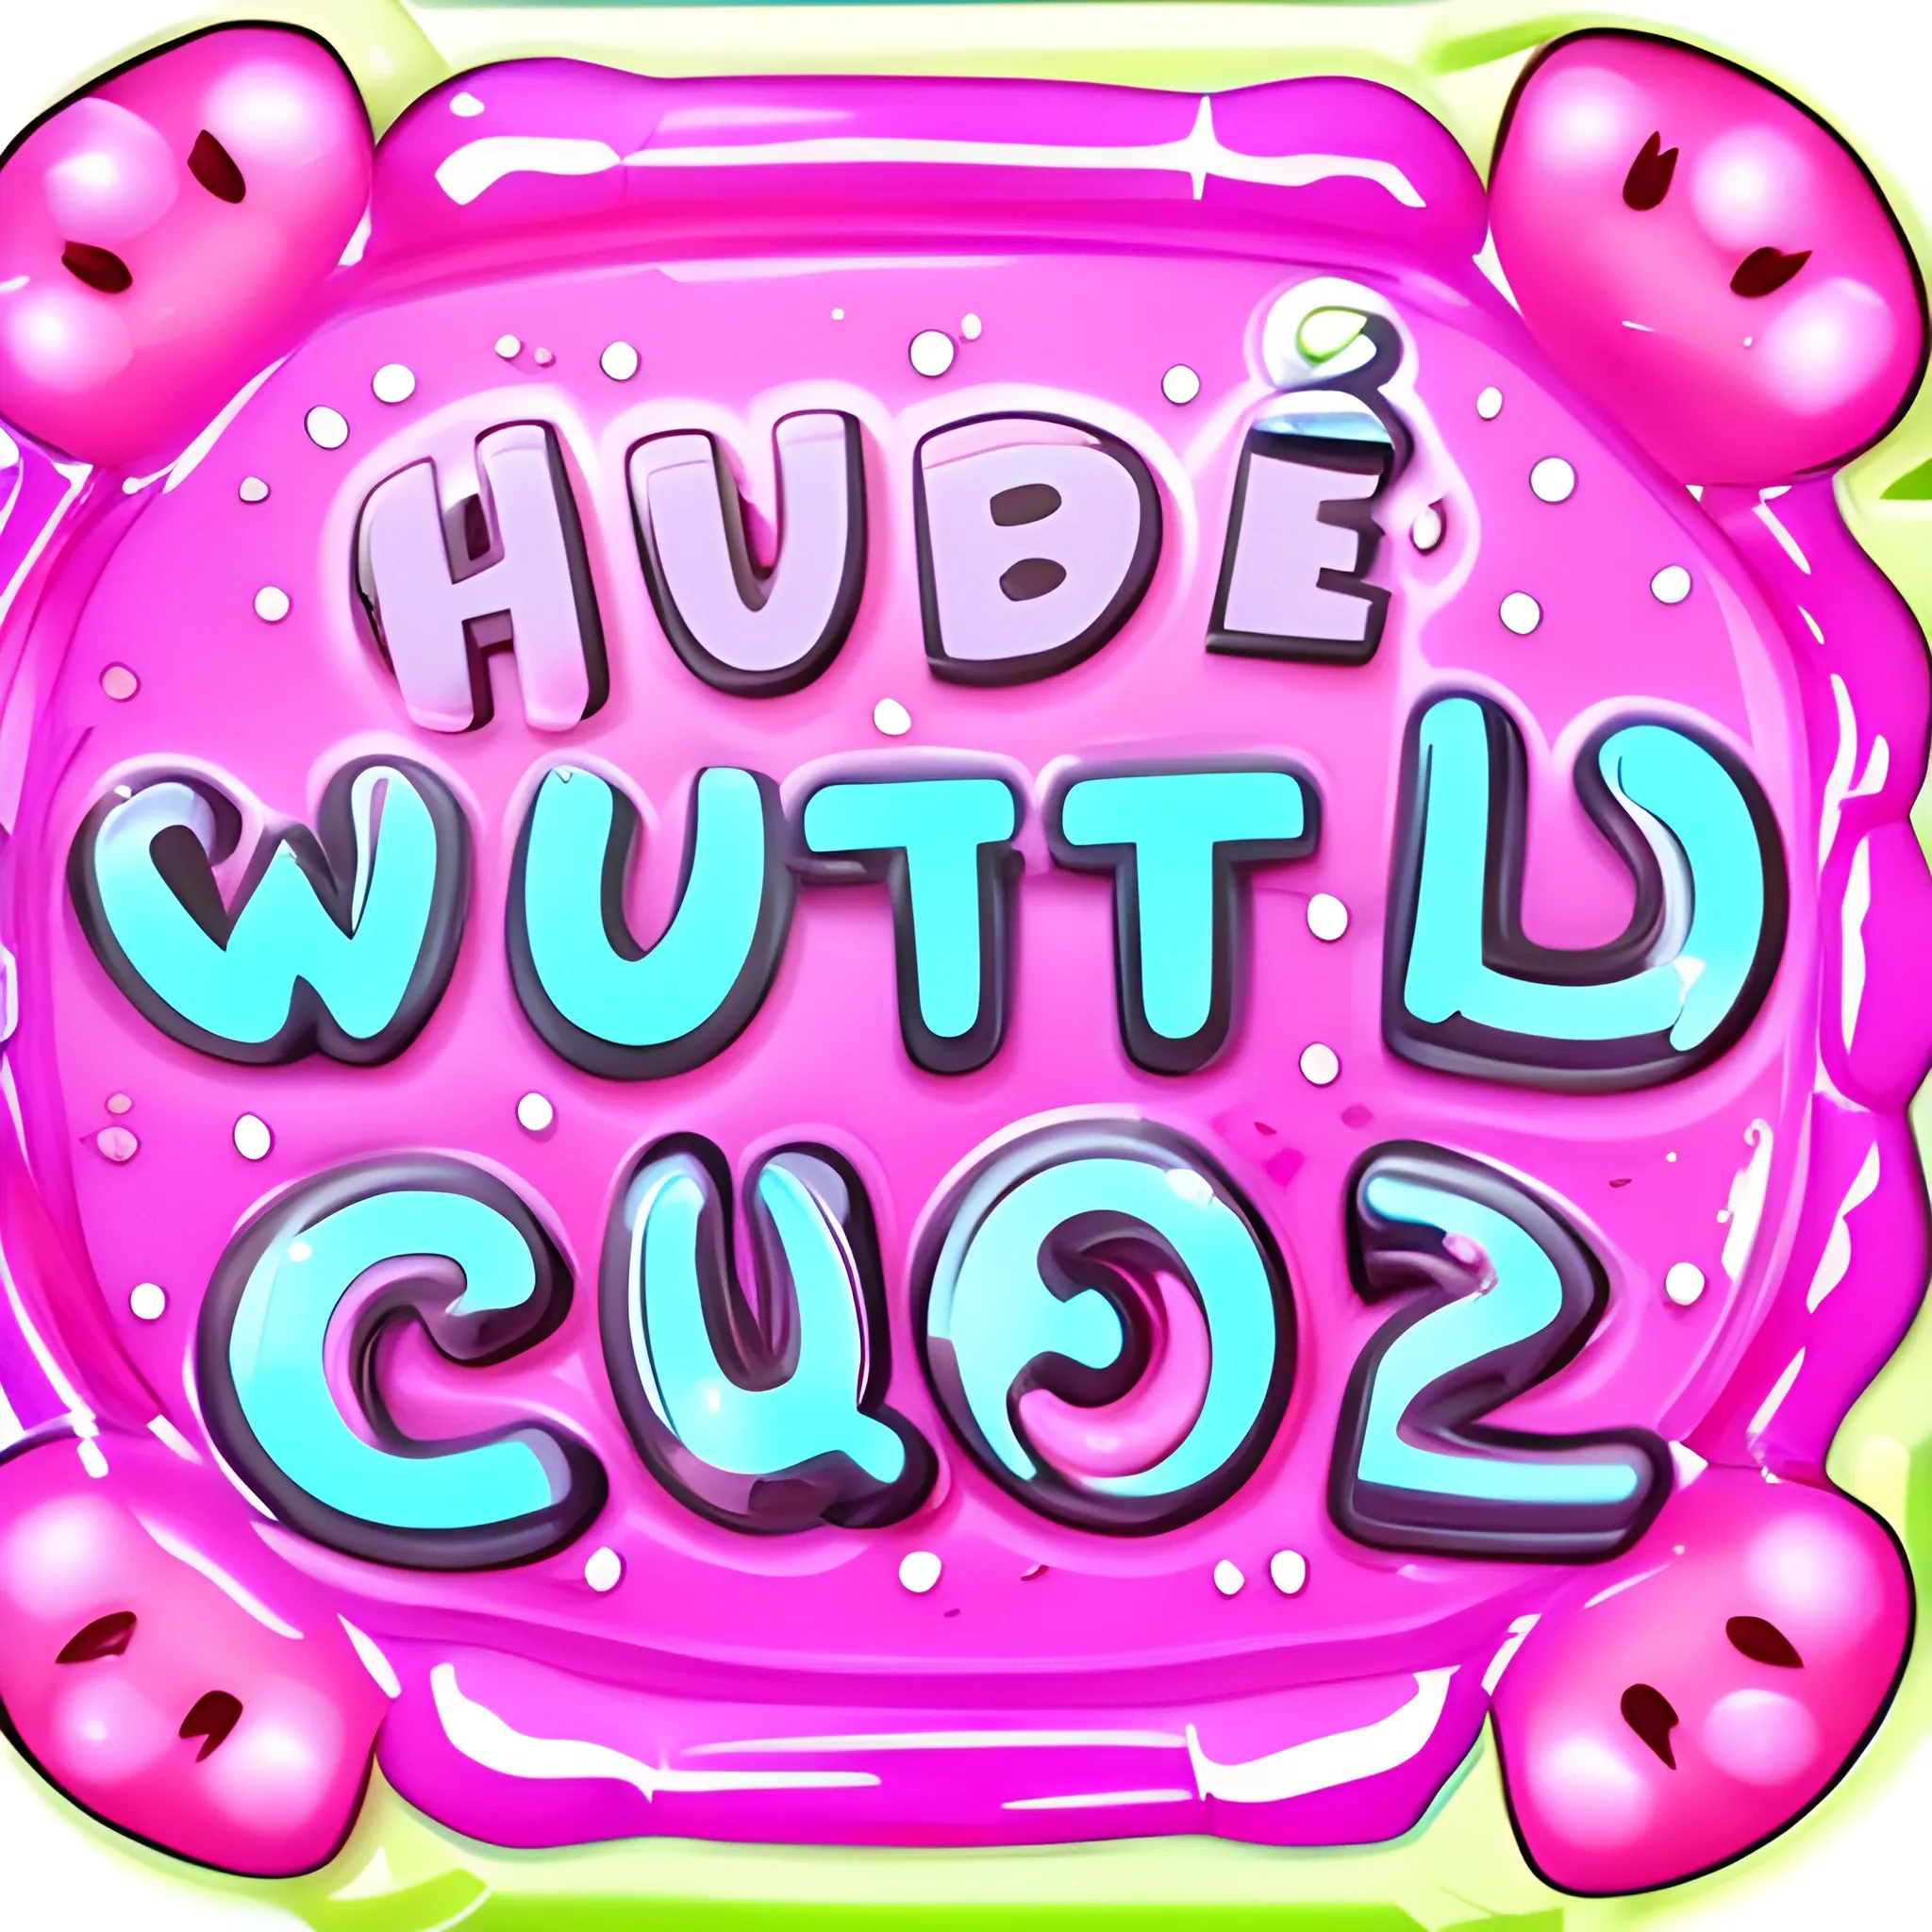 write the phrase "Huba Team" in pink jelly